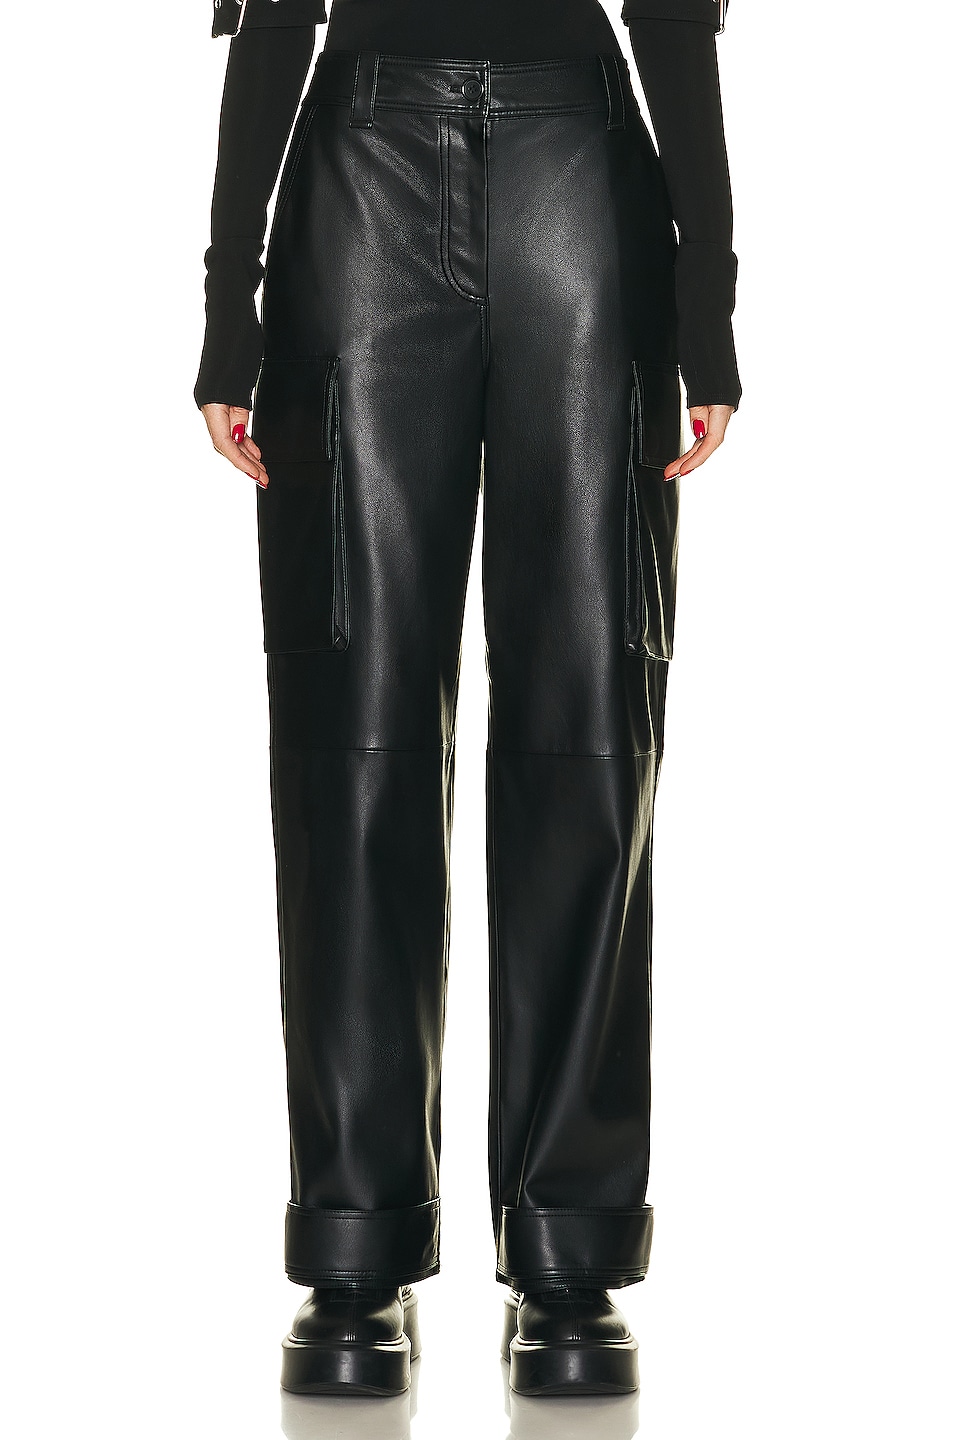 STAND STUDIO Asha Faux Leather Cargo Pant in Black | FWRD